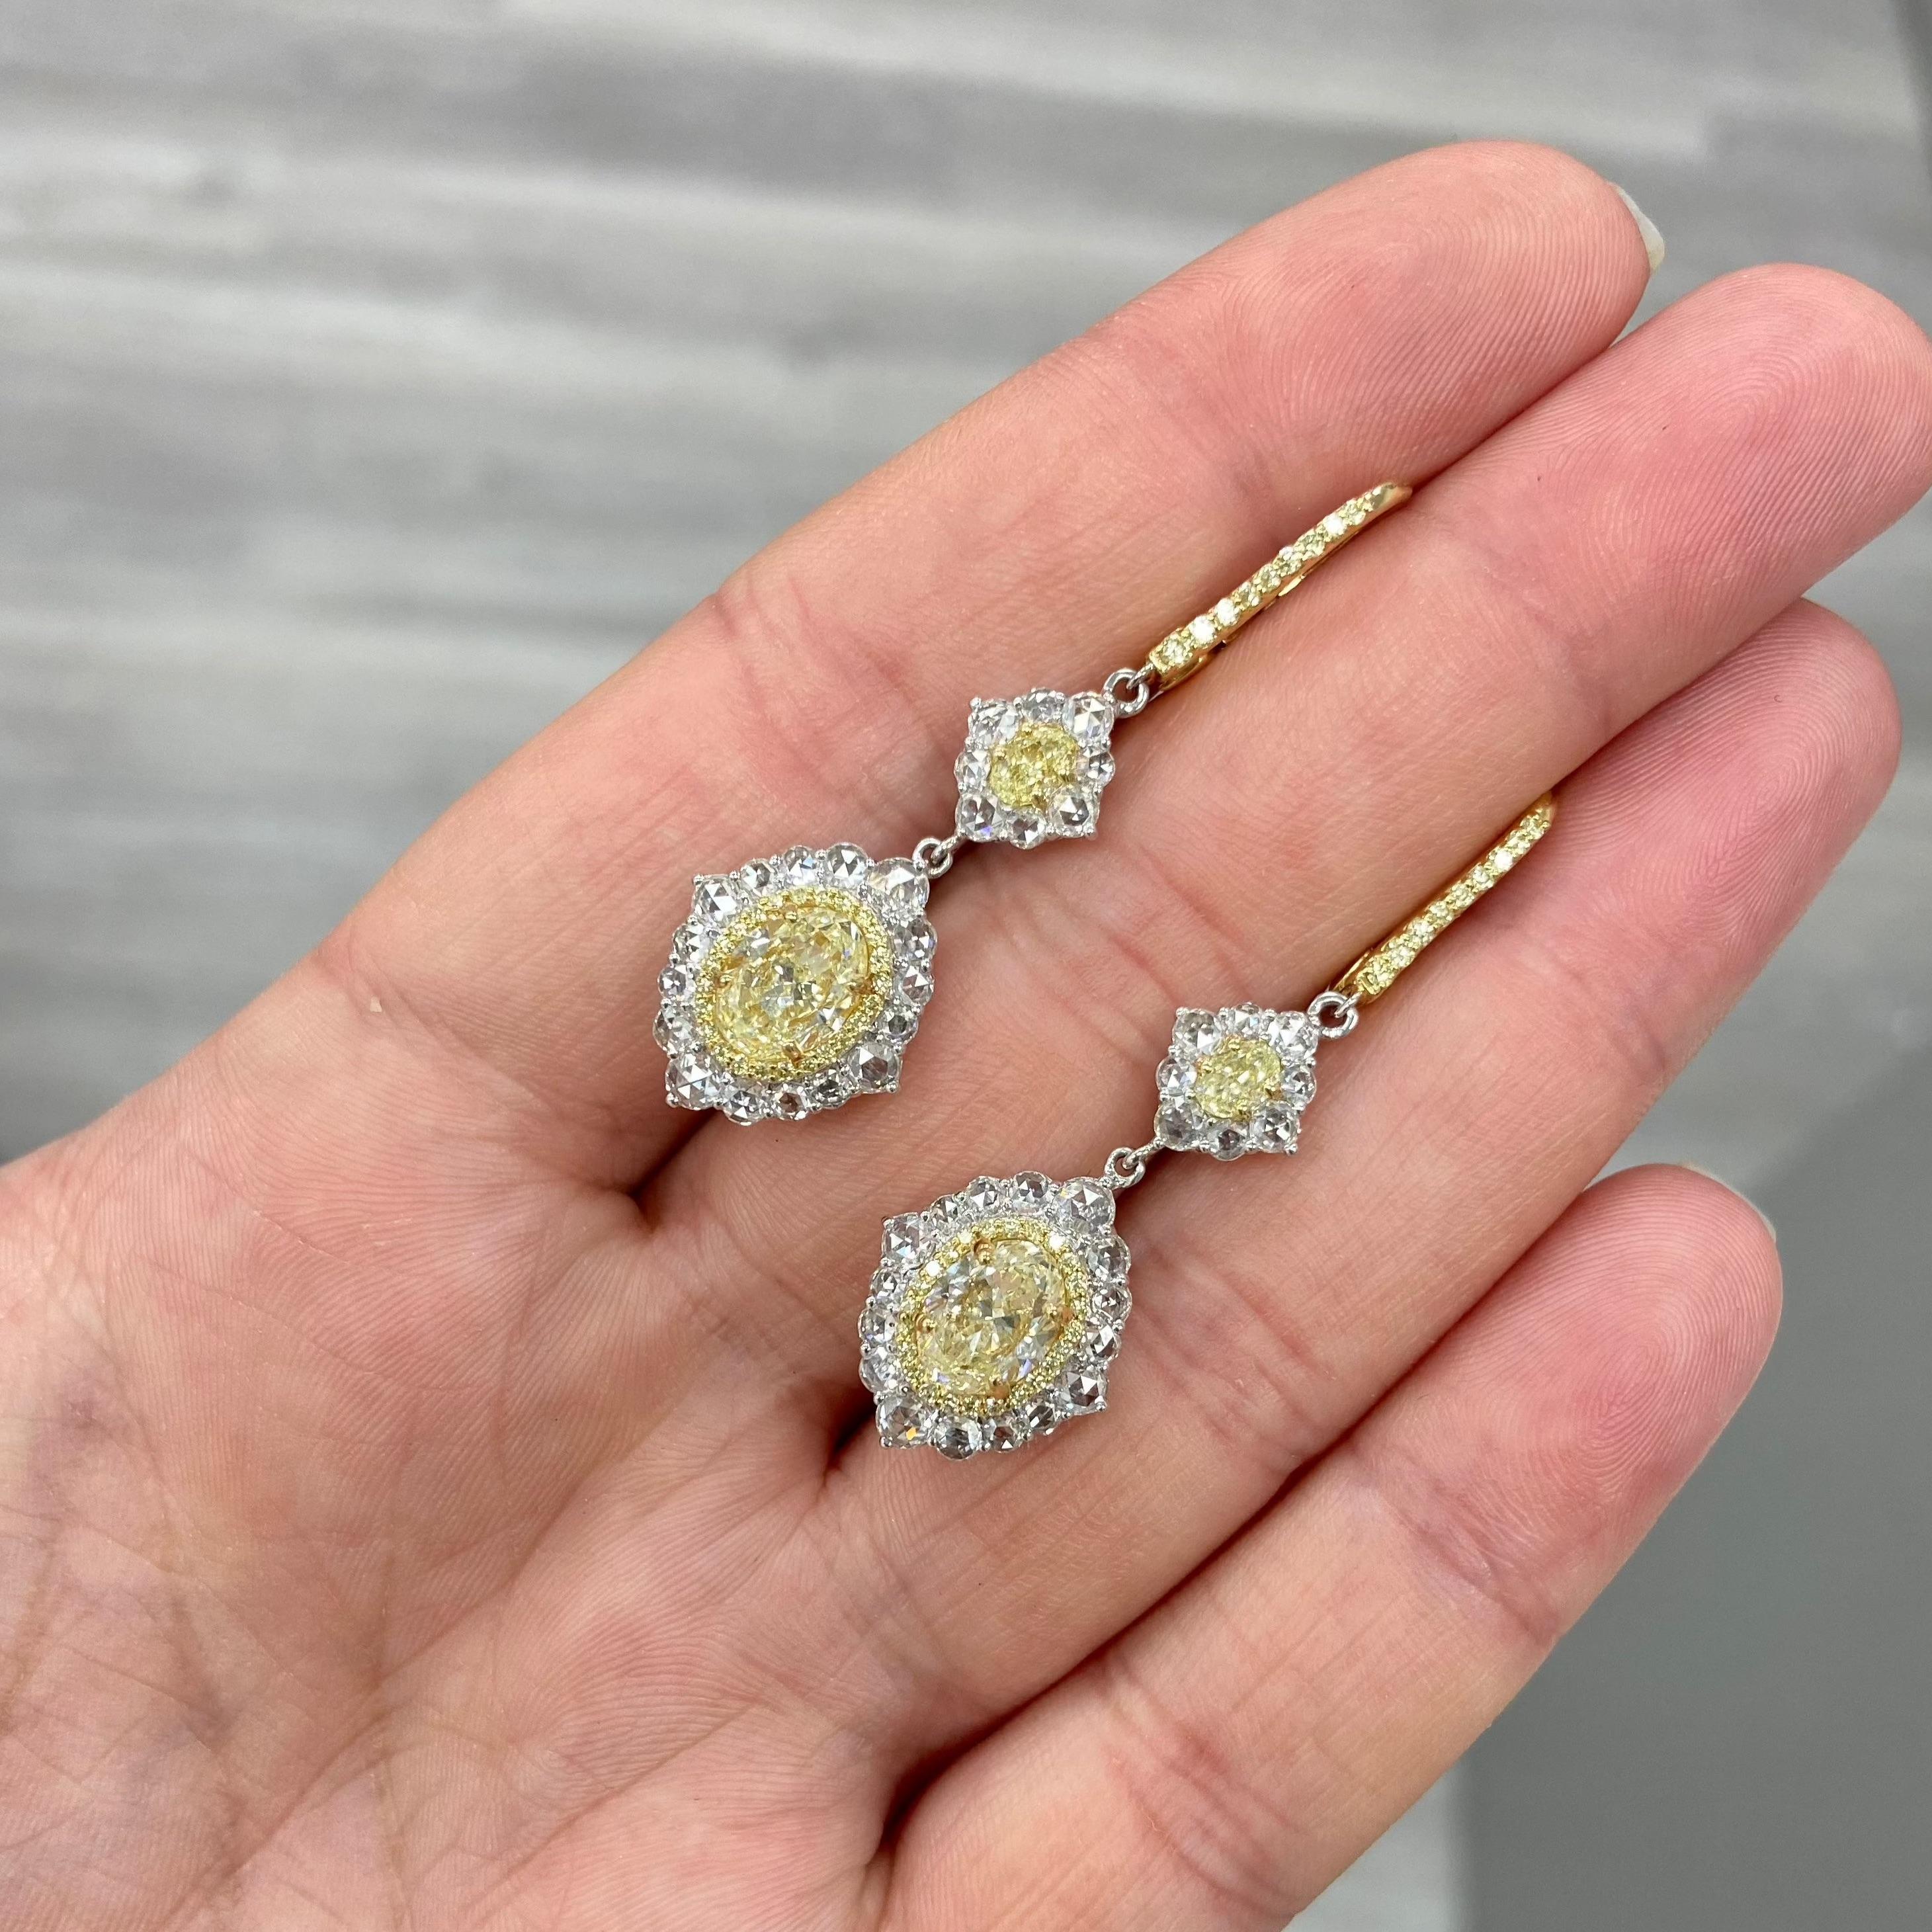 5.85ct total weight
1.50ct + 1.51ct GIA Light Yellow Oval Diamonds
SI1 and VVS2 clarity
0.50ct Light Yellow Oval Diamonds
2.34 Rose Cut & Surrounding Diamonds
Set in 18k Yellow Gold
Handmade in NYC

This piece can be viewed before purchase in our